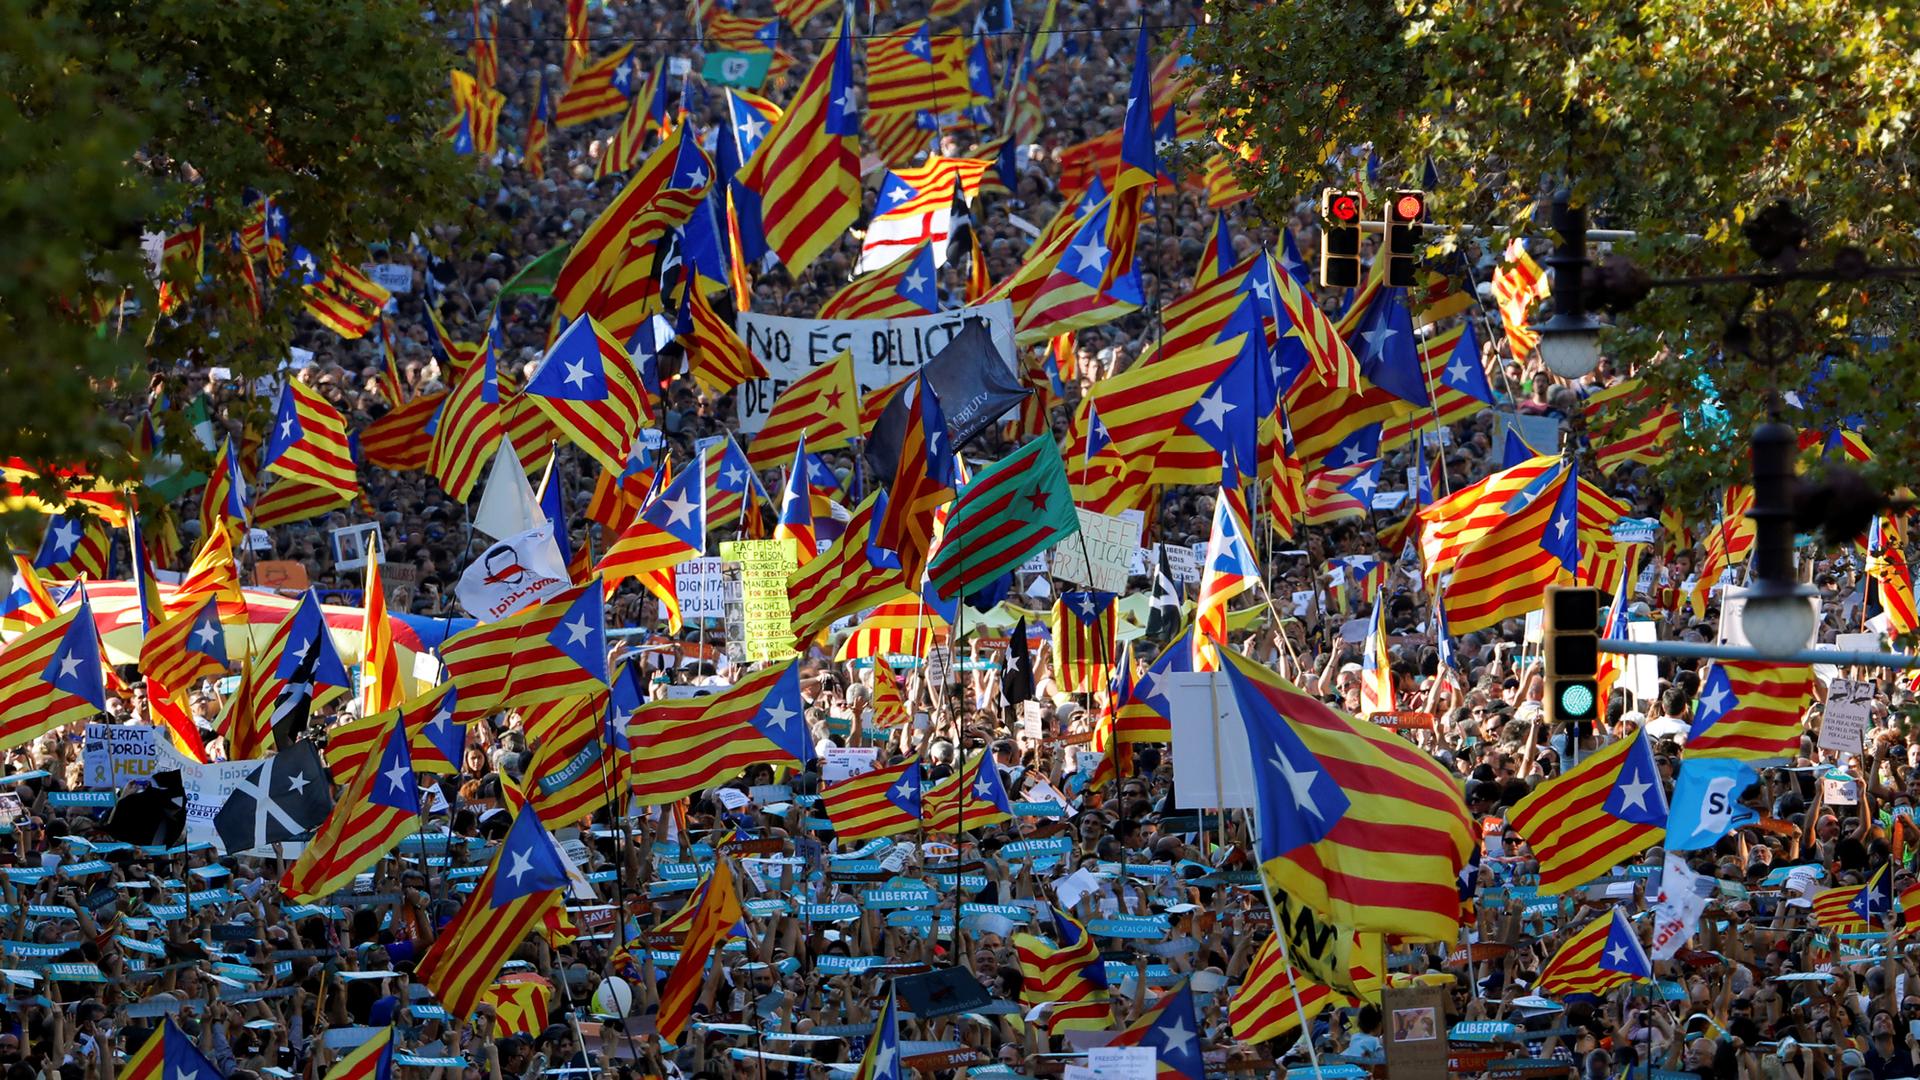 People wave Catalan flags during a demonstration organized by Catalan pro-independence movements following the imprisonment Jordi Sanchez and Jordi Cuixart, in Barcelona, Oct. 21, 2017.